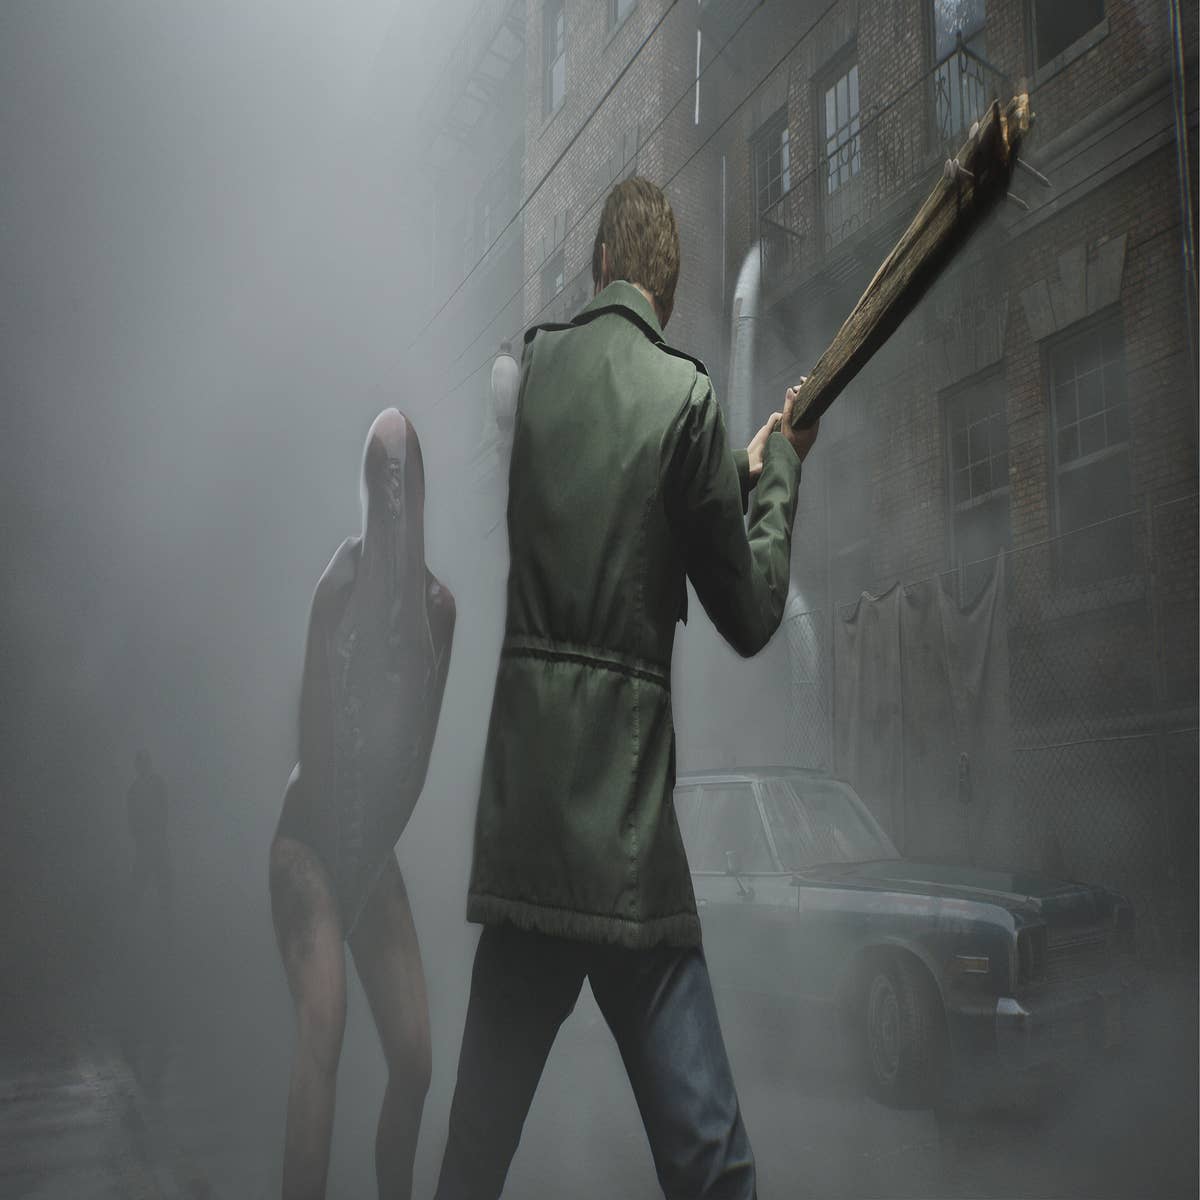 How Bloober Team can make Silent Hill 2 remake more authentic